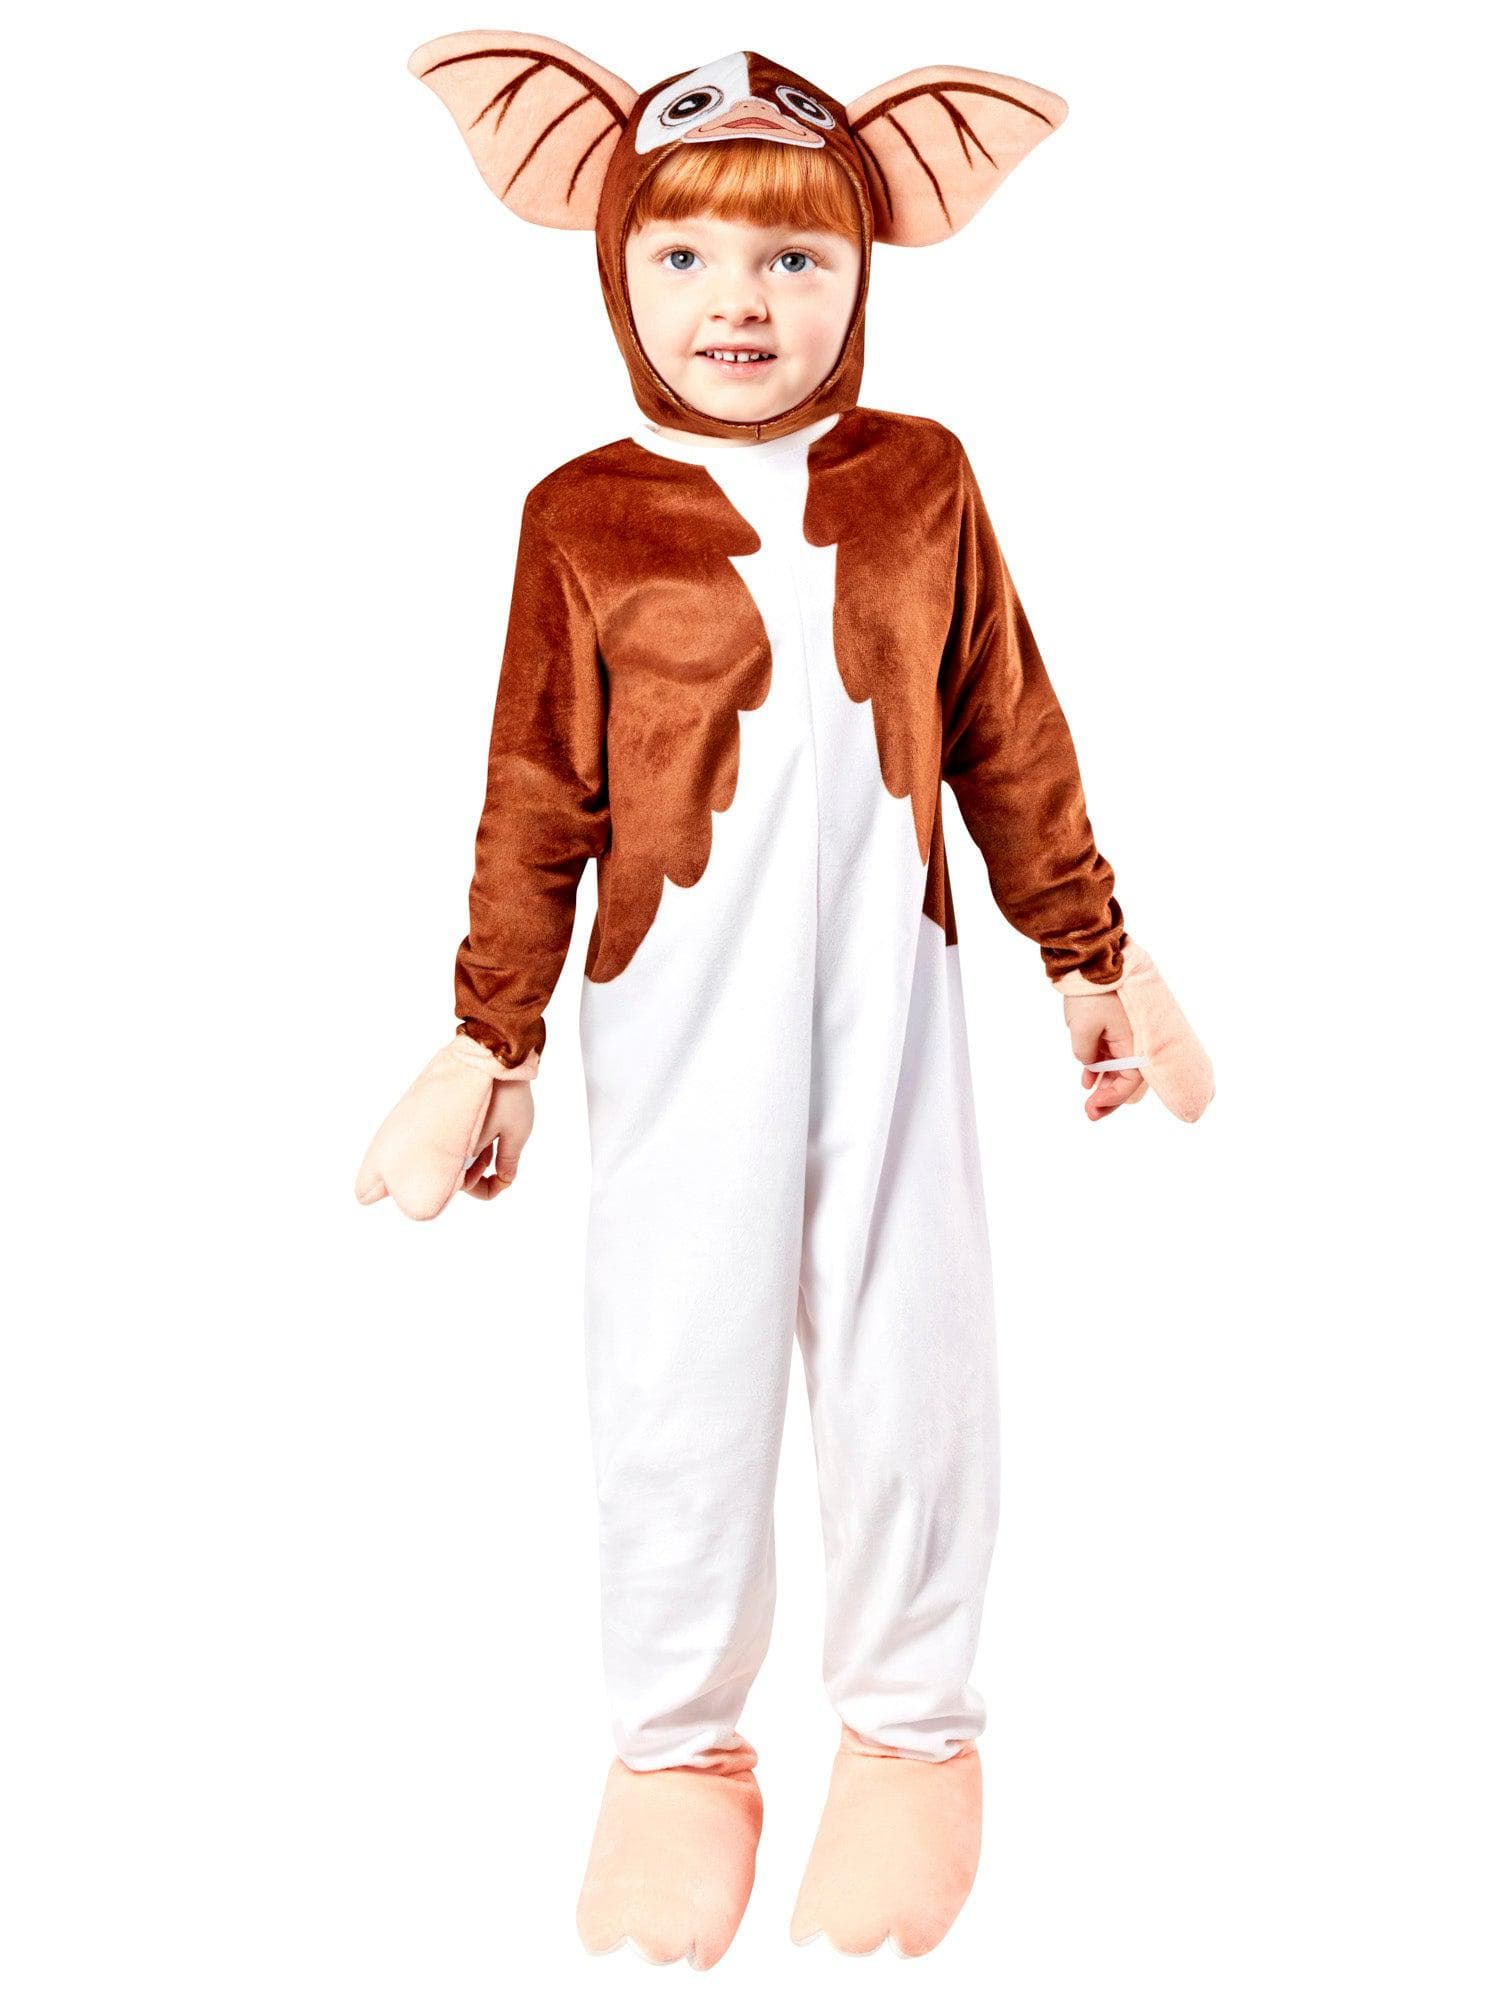 Gremlins Gizmo Baby/Toddler Costume - costumes.com